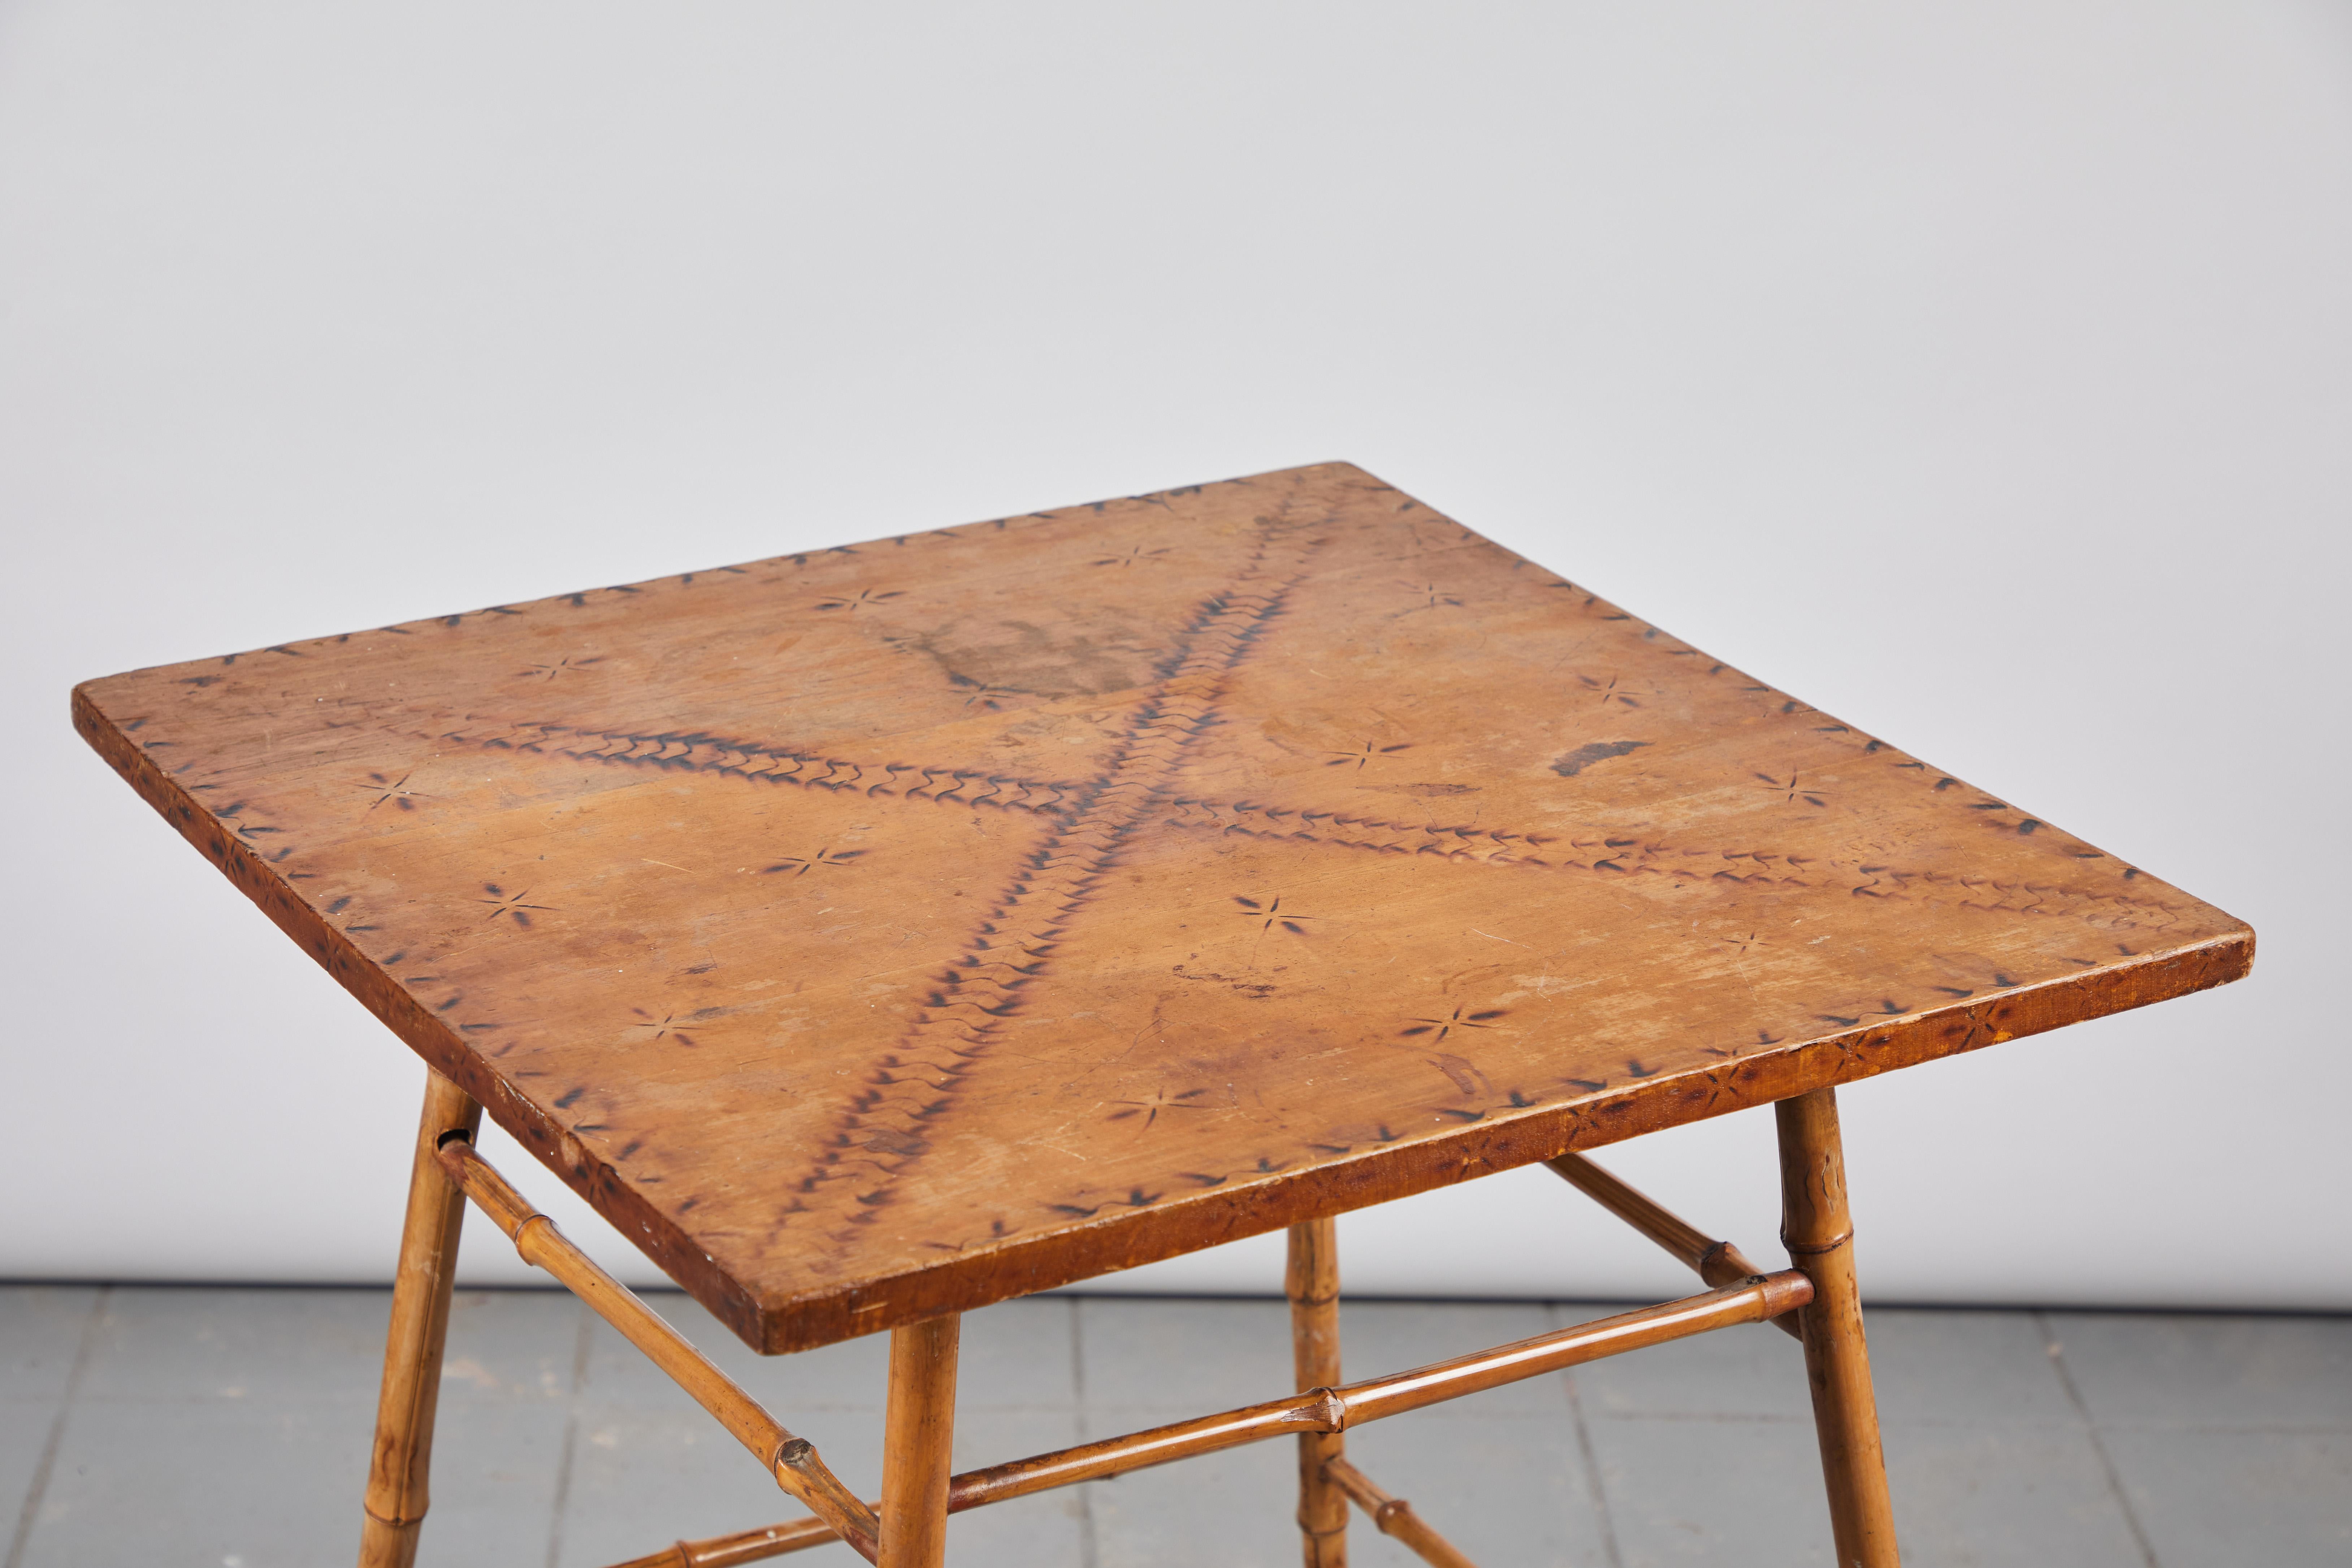 Bamboo side table with wooden top with darkened stenciled details.